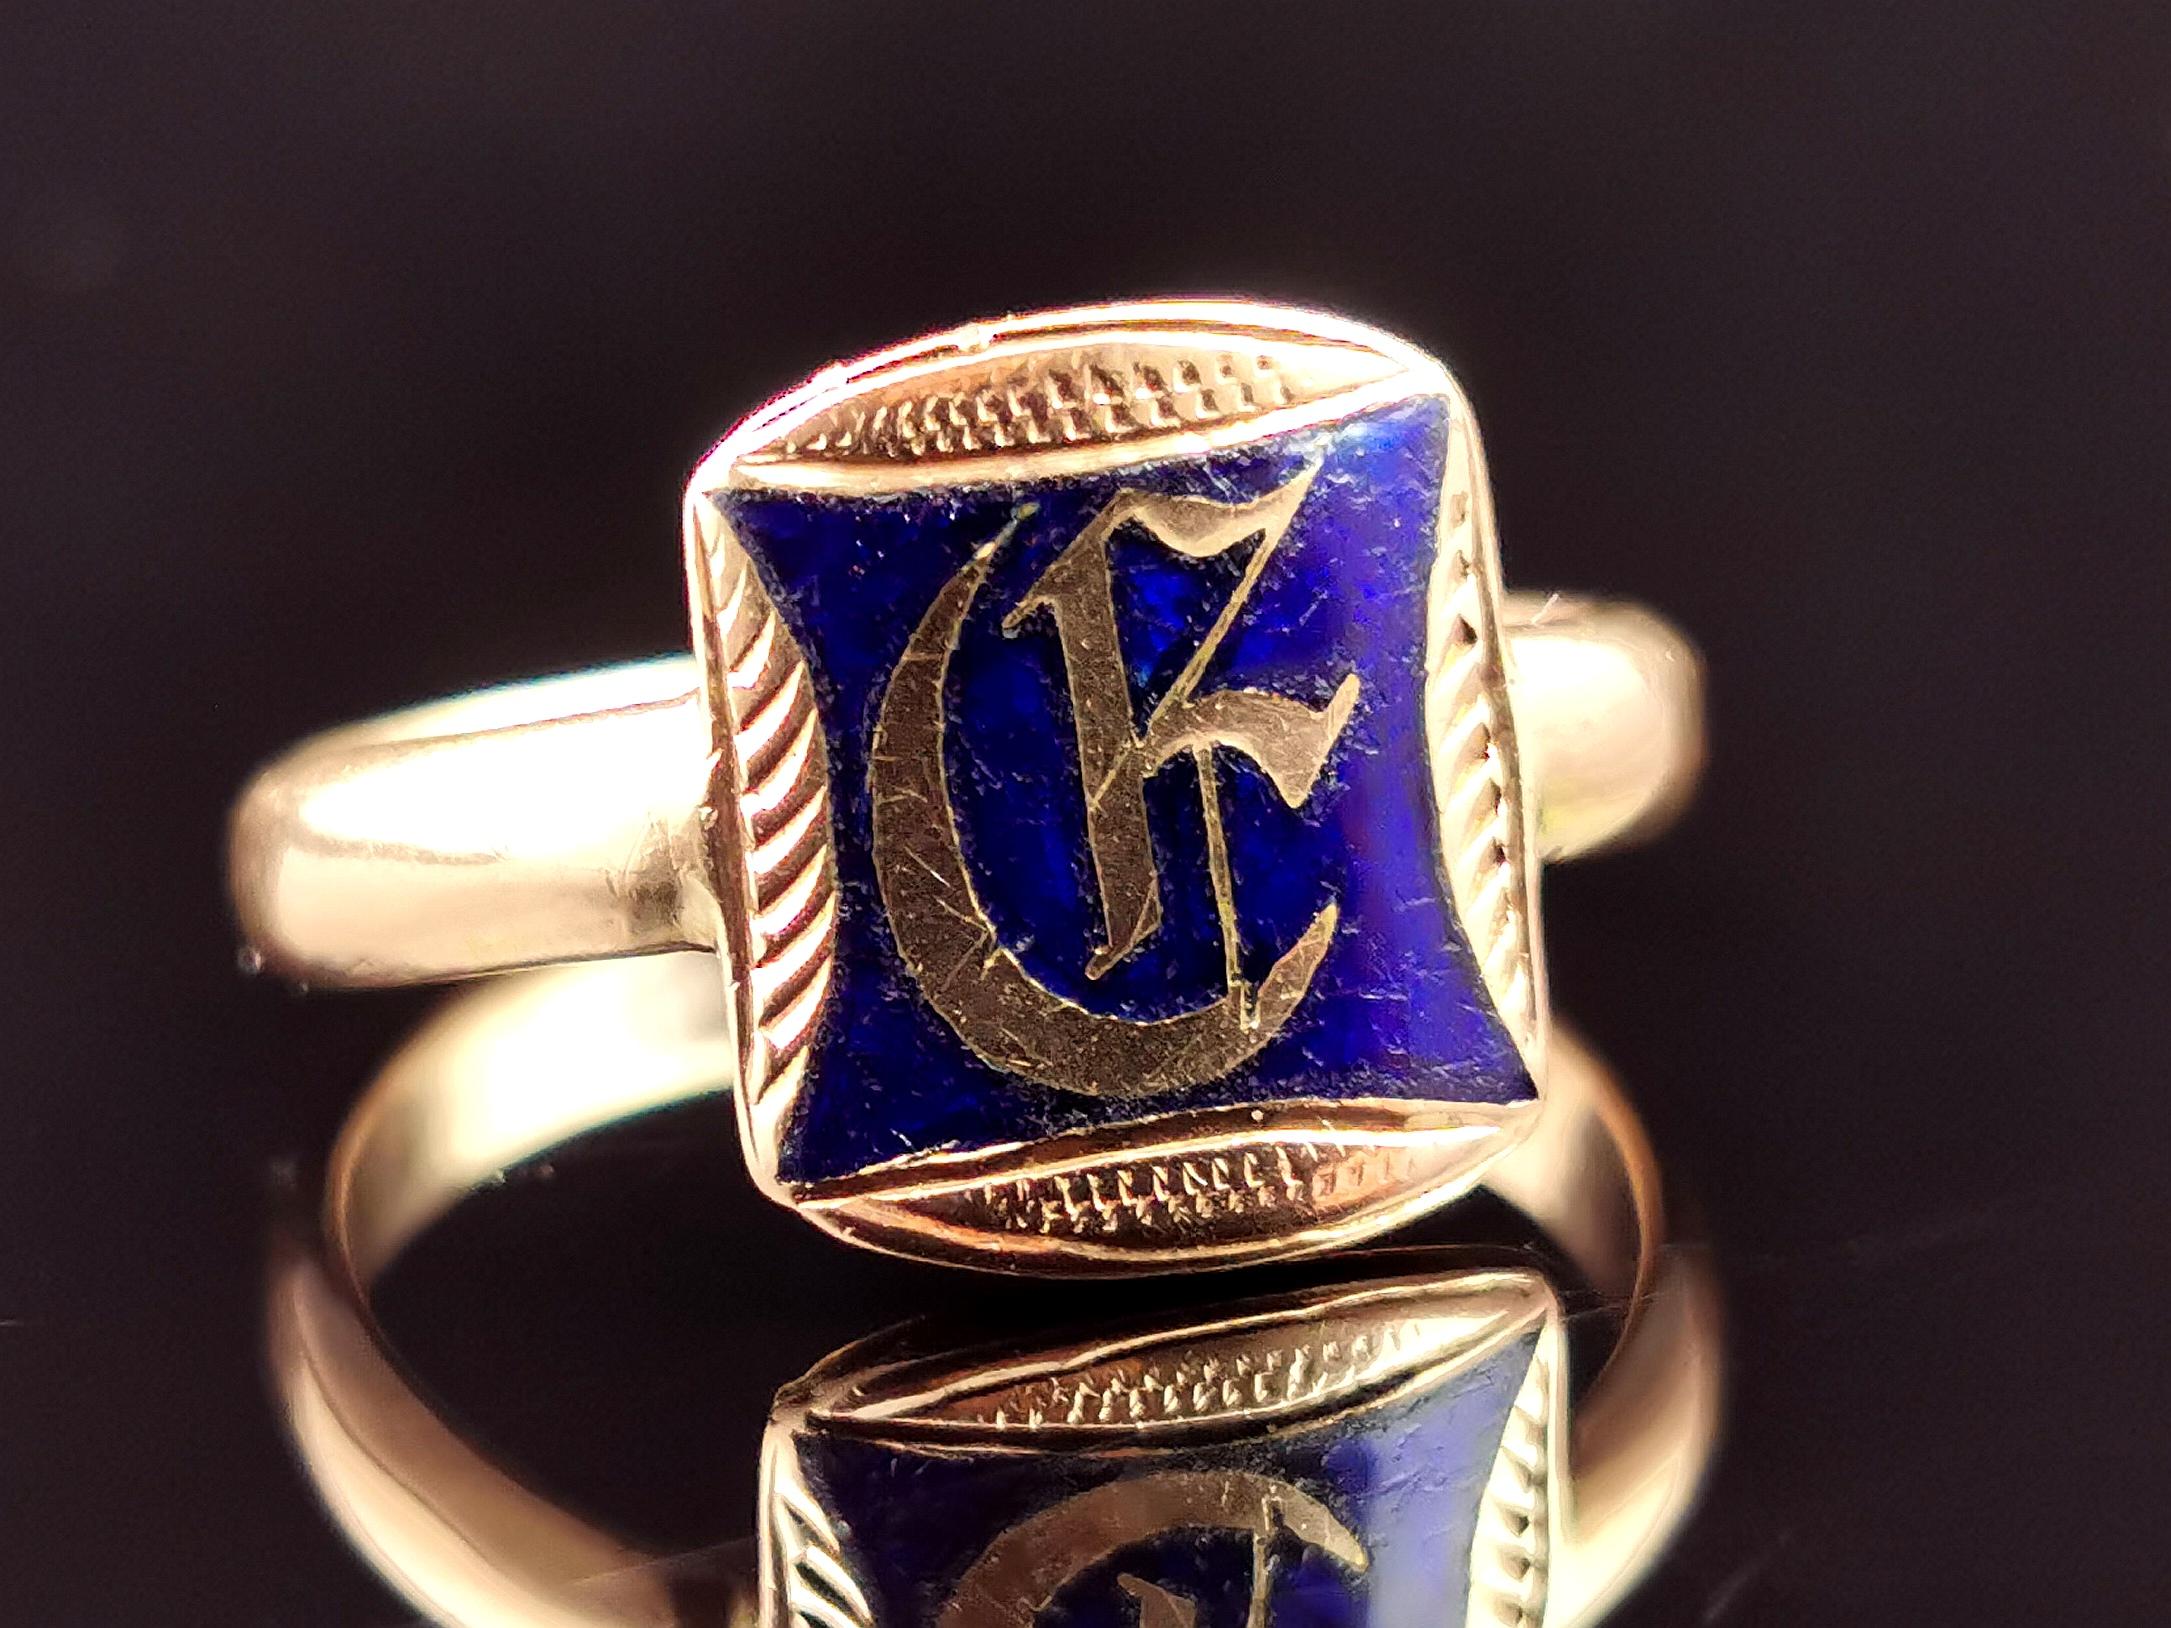 A truly handsome antique 9ct Rose gold monogram signet ring.

It has a rectangular shaped face finished in a royal blue enamel with an engraved monogram of initials in fancy gothic script, each letter has a different style of engraving.

It has a